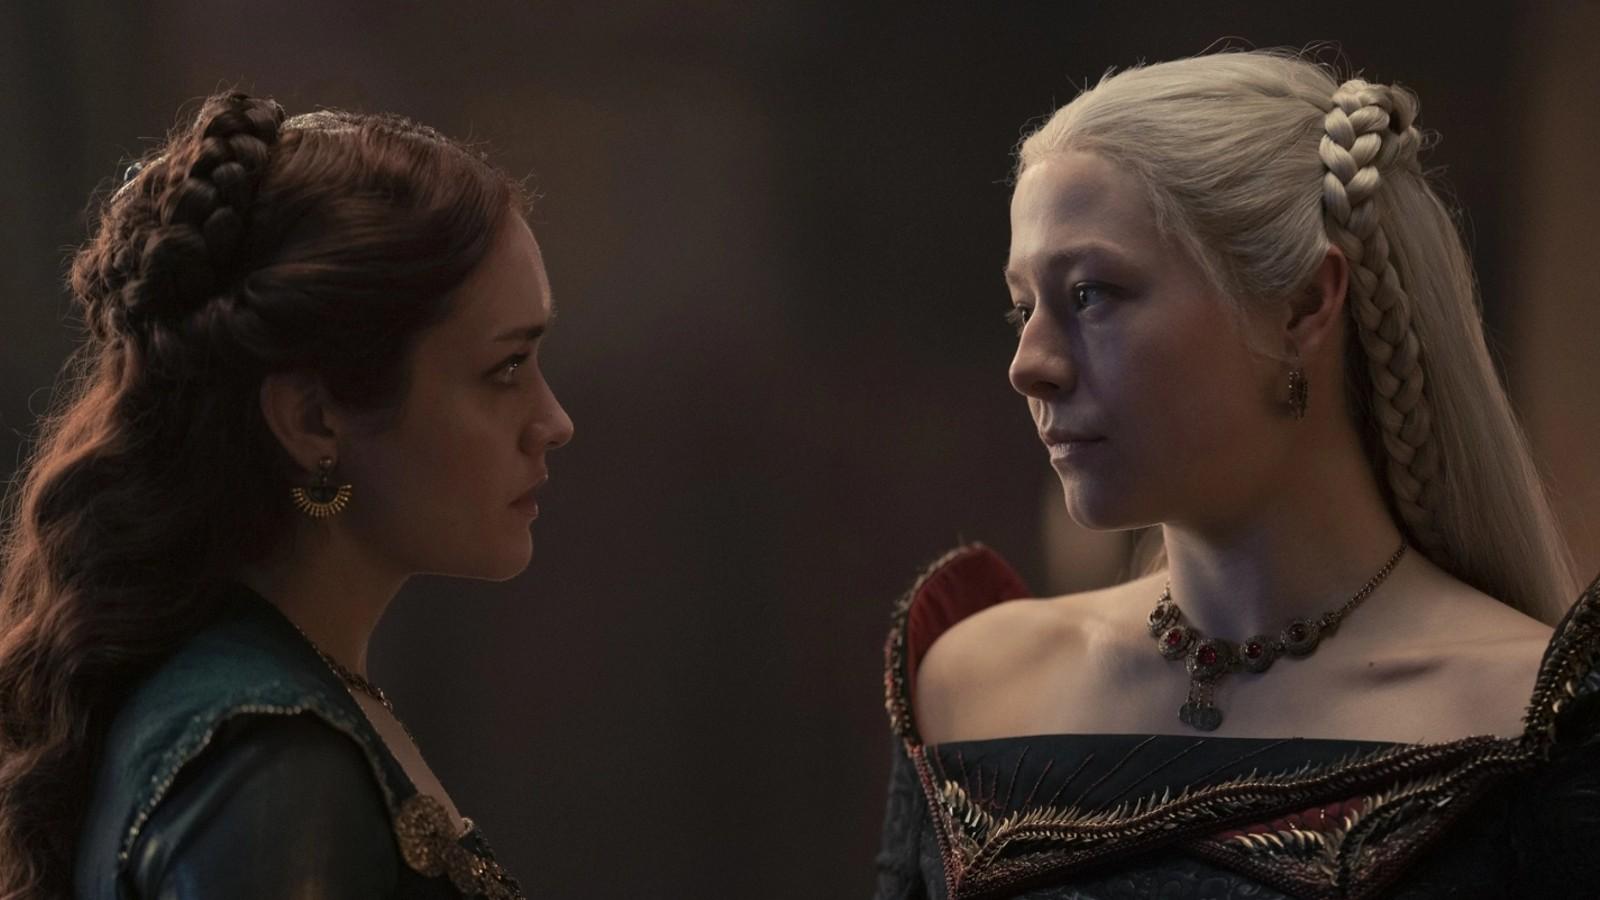 Olivia Cooke and Emma D'Arcy as Alicent and Rhaenyra respectively in House of the Dragon